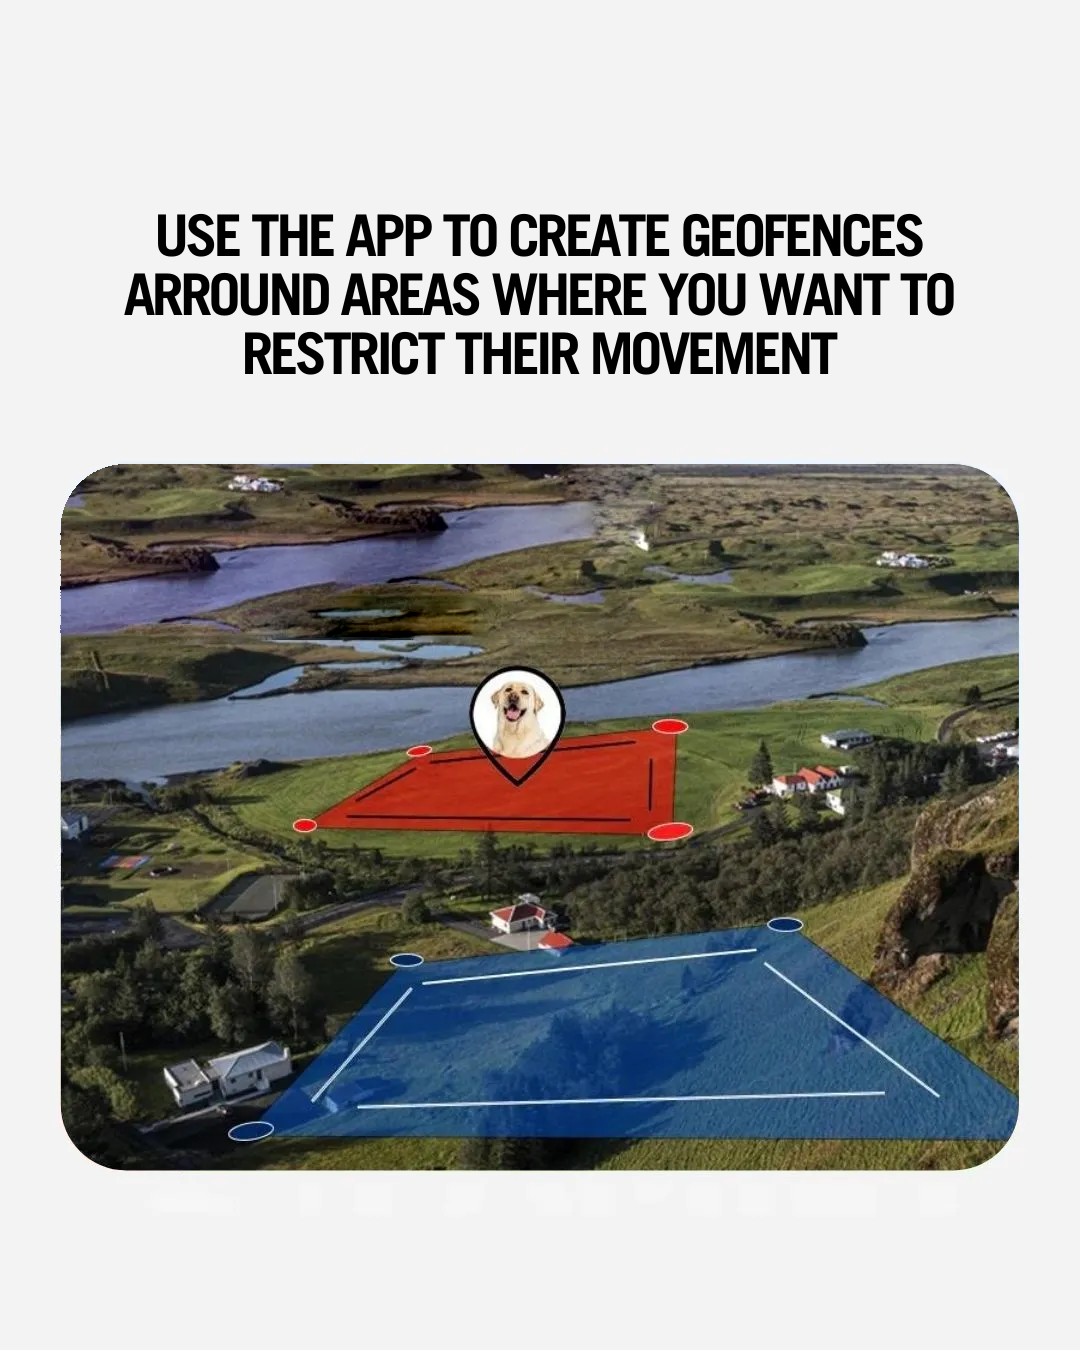 App feature for setting up geofenced areas